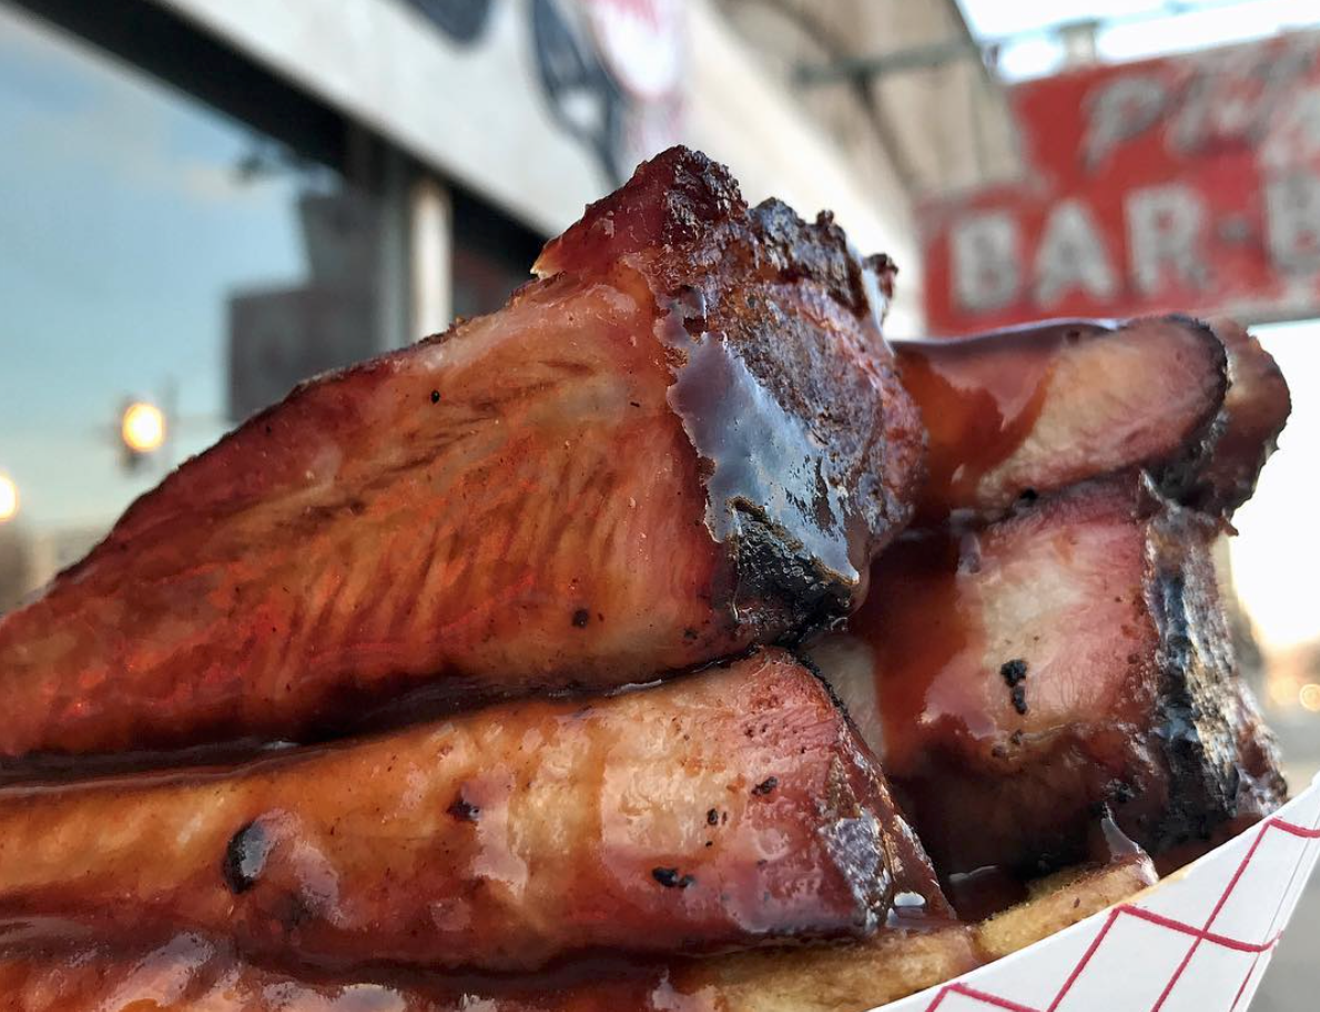 Barbecue from the Chicago-based BBQ Supply Co., opening soon in Denver.